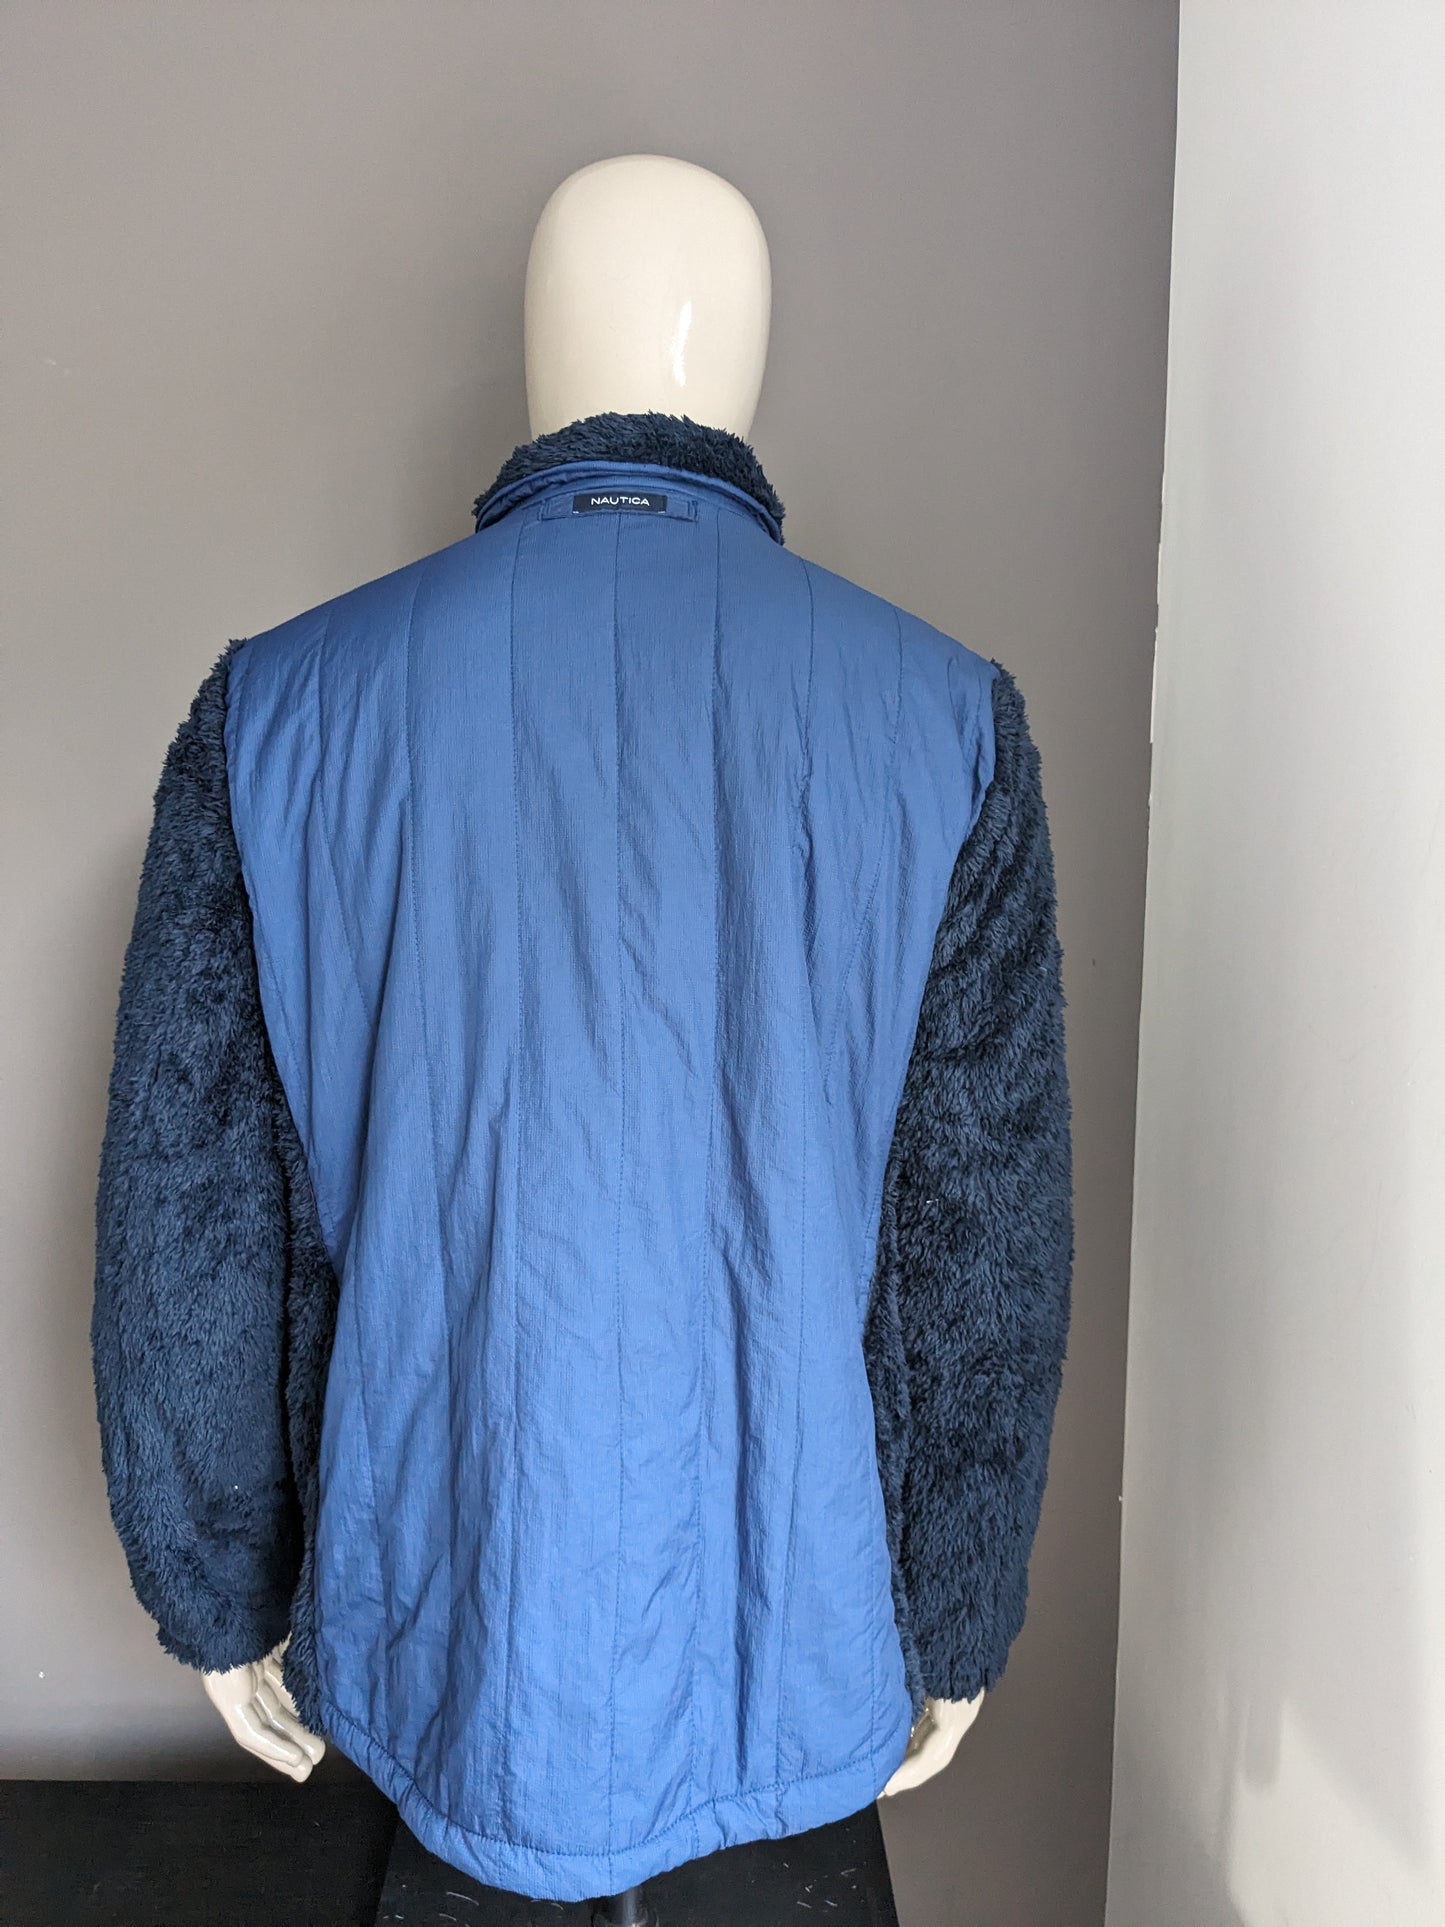 Nautica lined winter jacket / jacket. Dark blue colored. Size L.